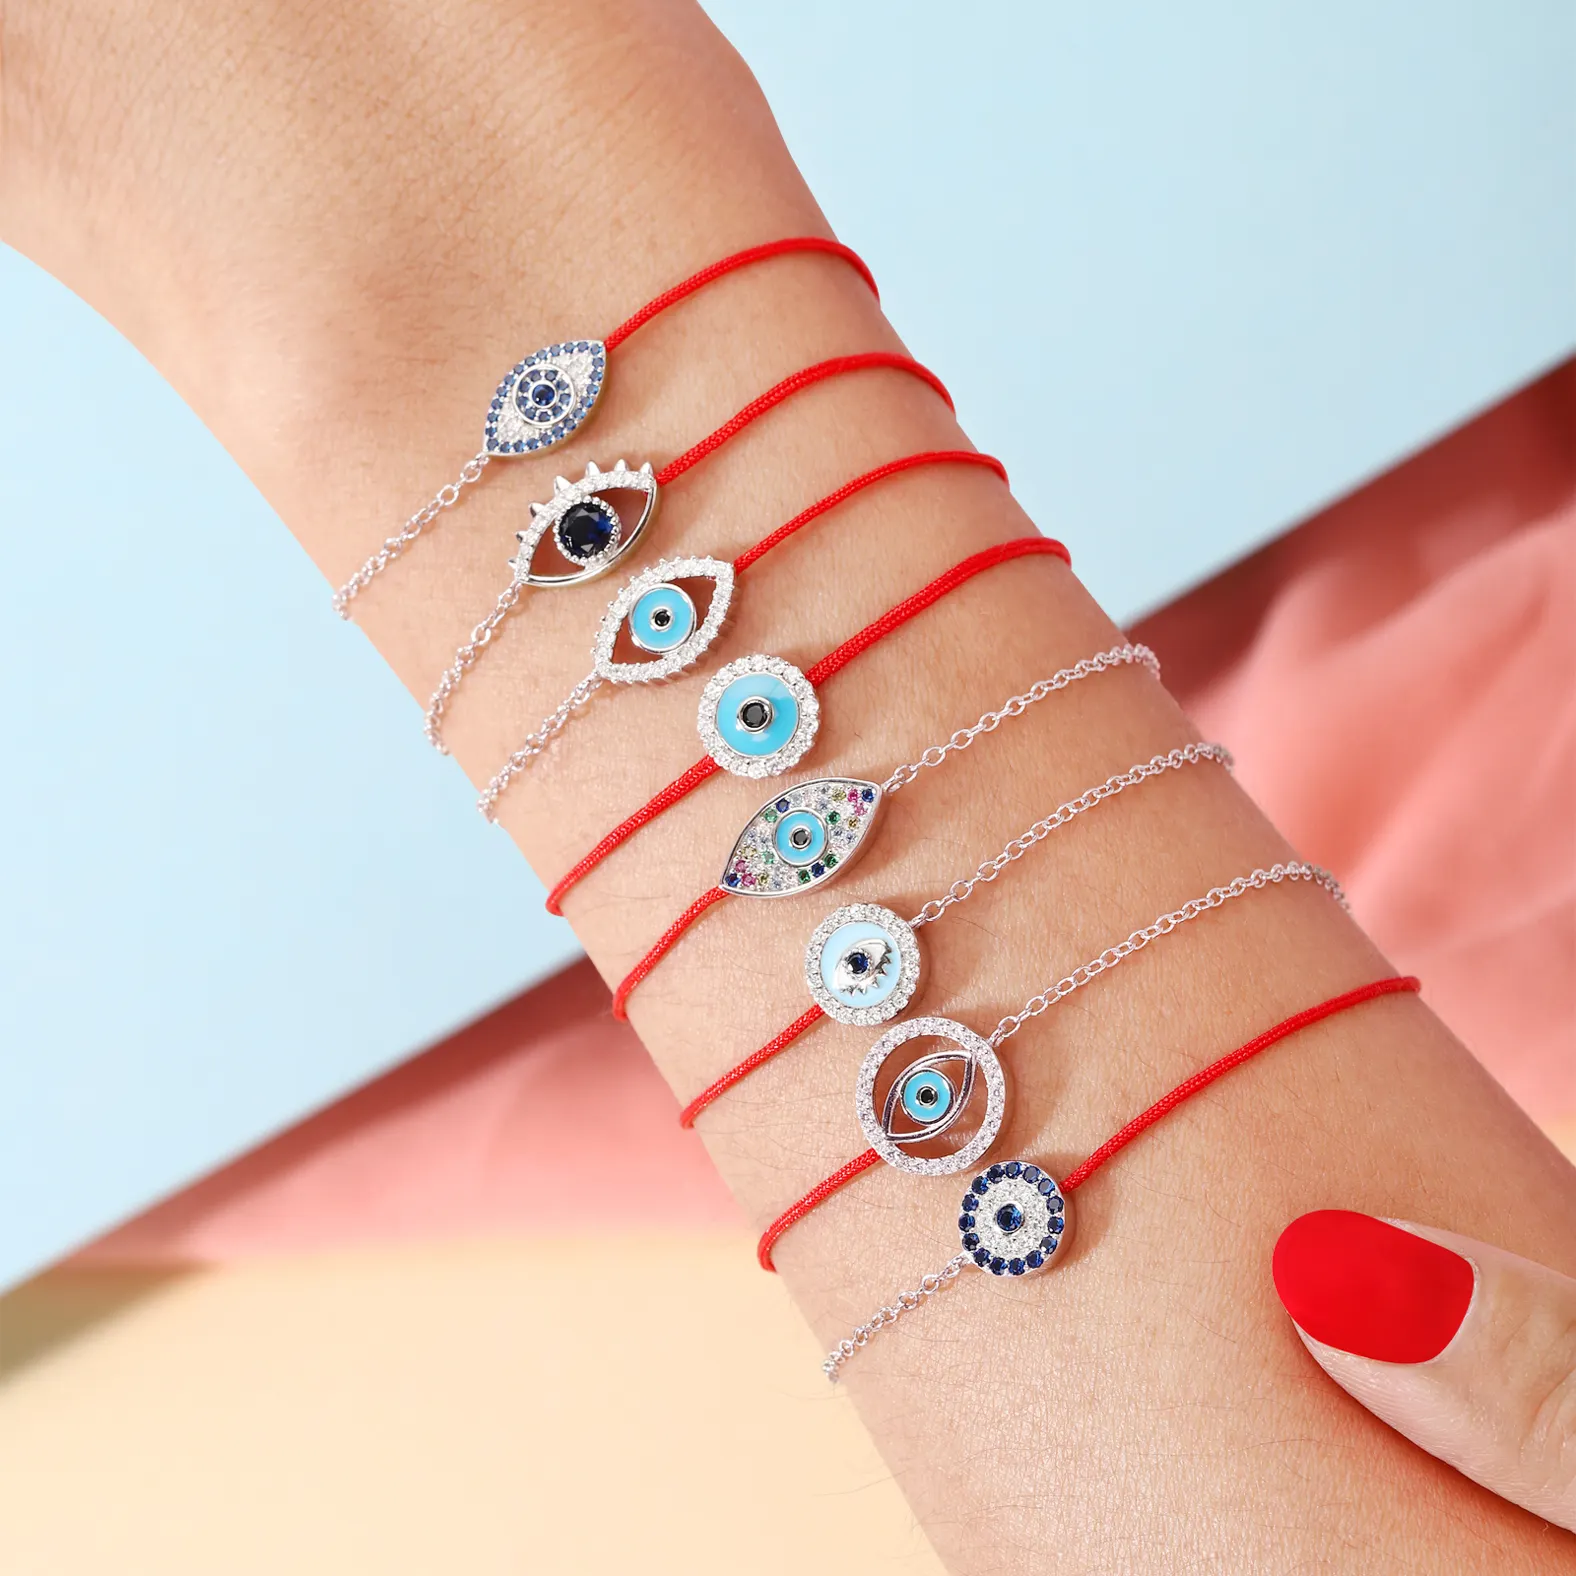 Colorful Rope Bracelets With Heart Or Evil Crystal Eyes Charms Bracelets 925 Sterling Silver For Women All-match Items Jewelry